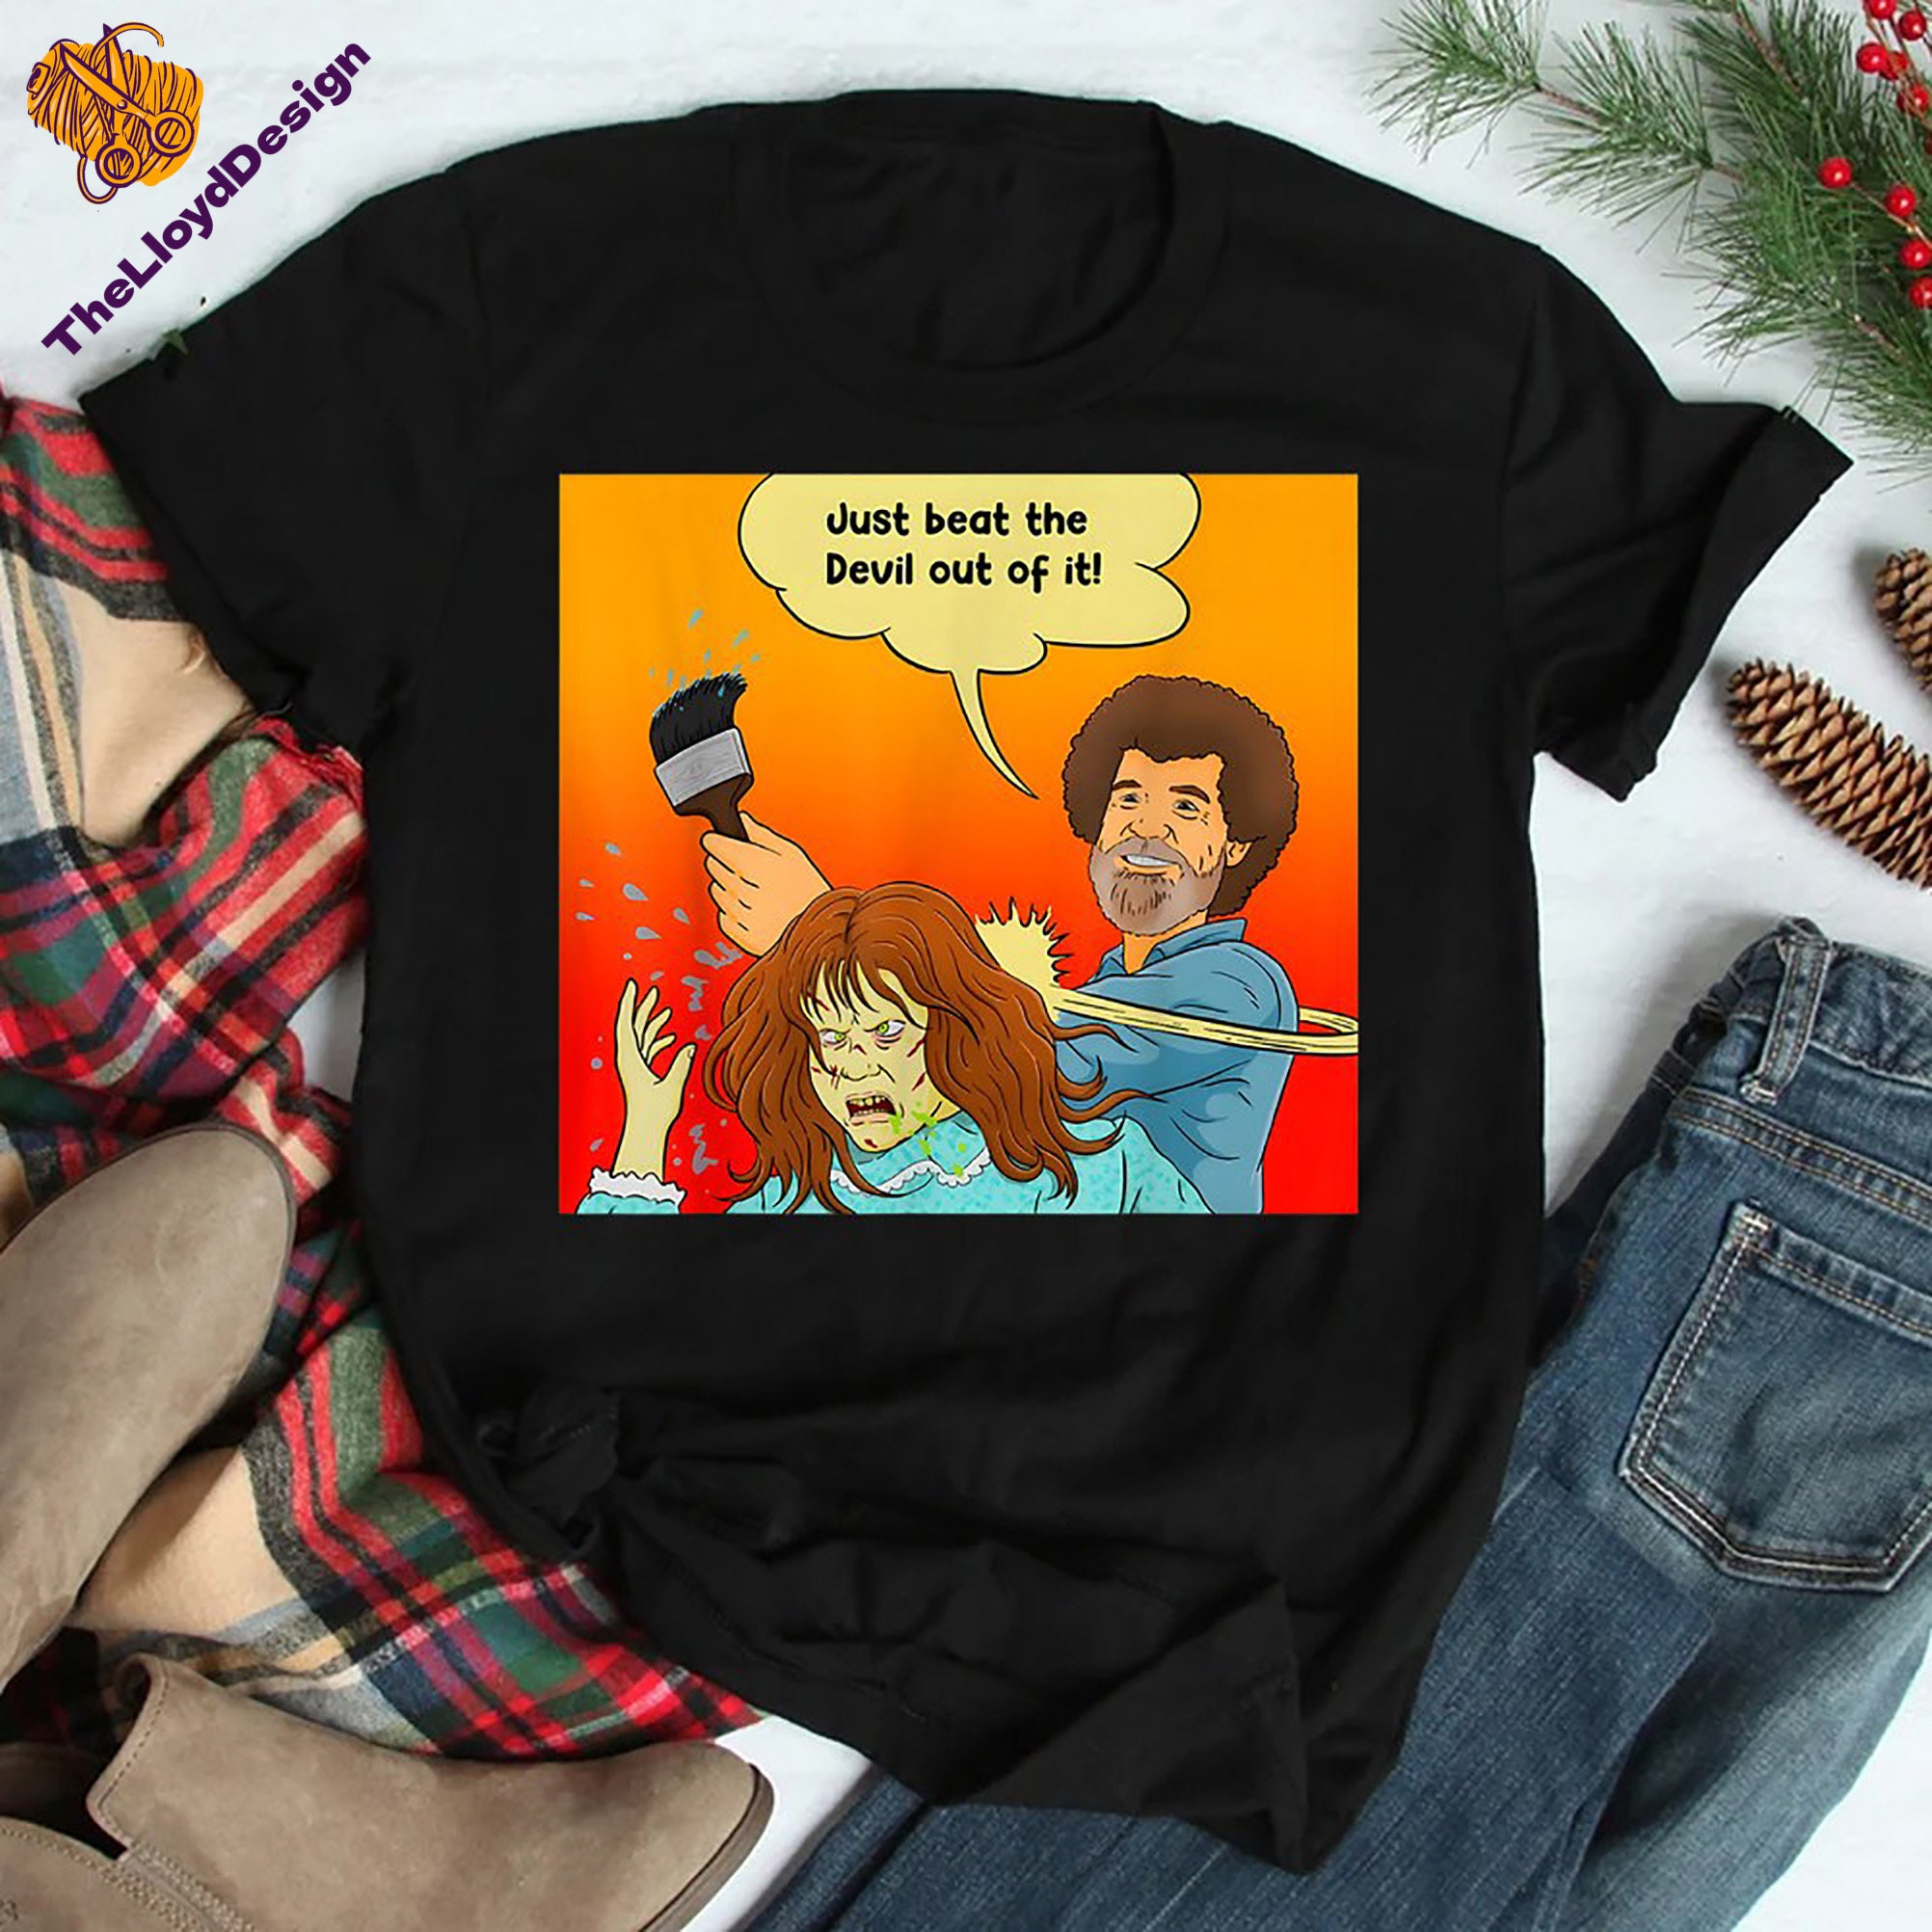 9 Gift Ideas for Bob Ross Fans  Bob ross, Fashion gifts, Happy little trees